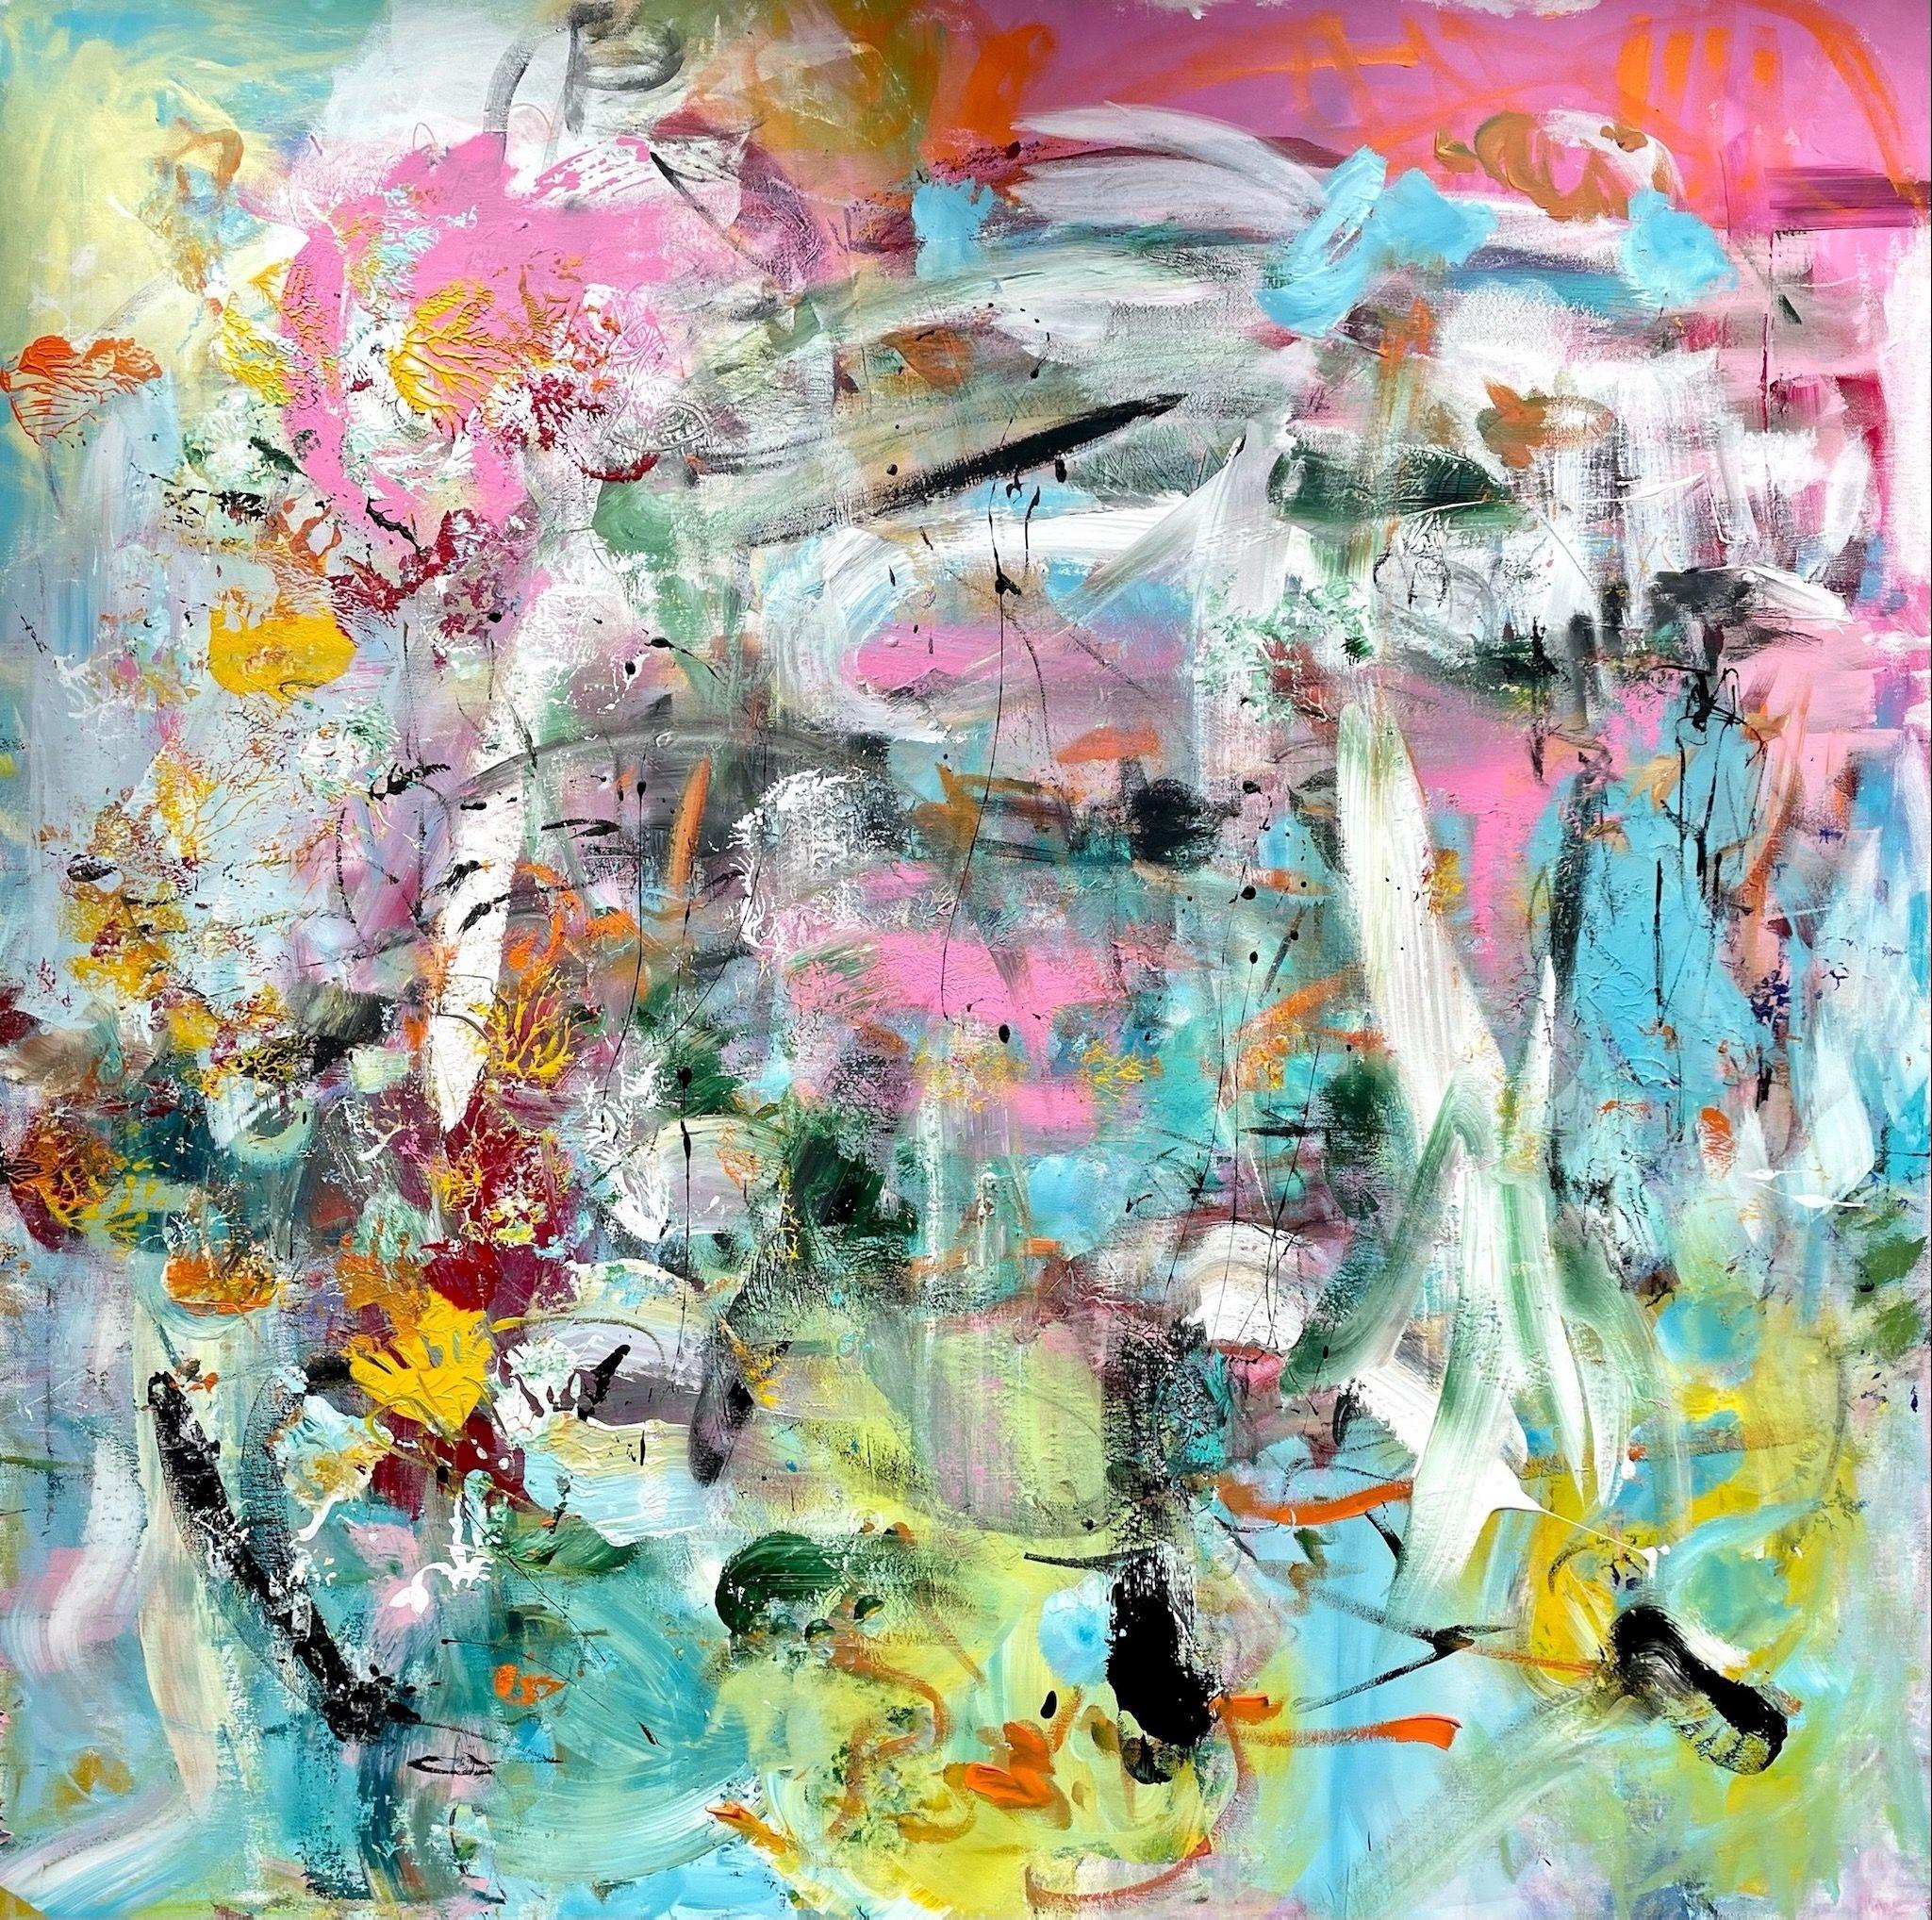 "Behalte den Ãœberblick (Keep track)" is a colorful, expressive acrylic painting on canvas.   Sometimes it is difficult to keep track of things these days. Too many impulses are pouring in on us. It is precisely then that it is important not to